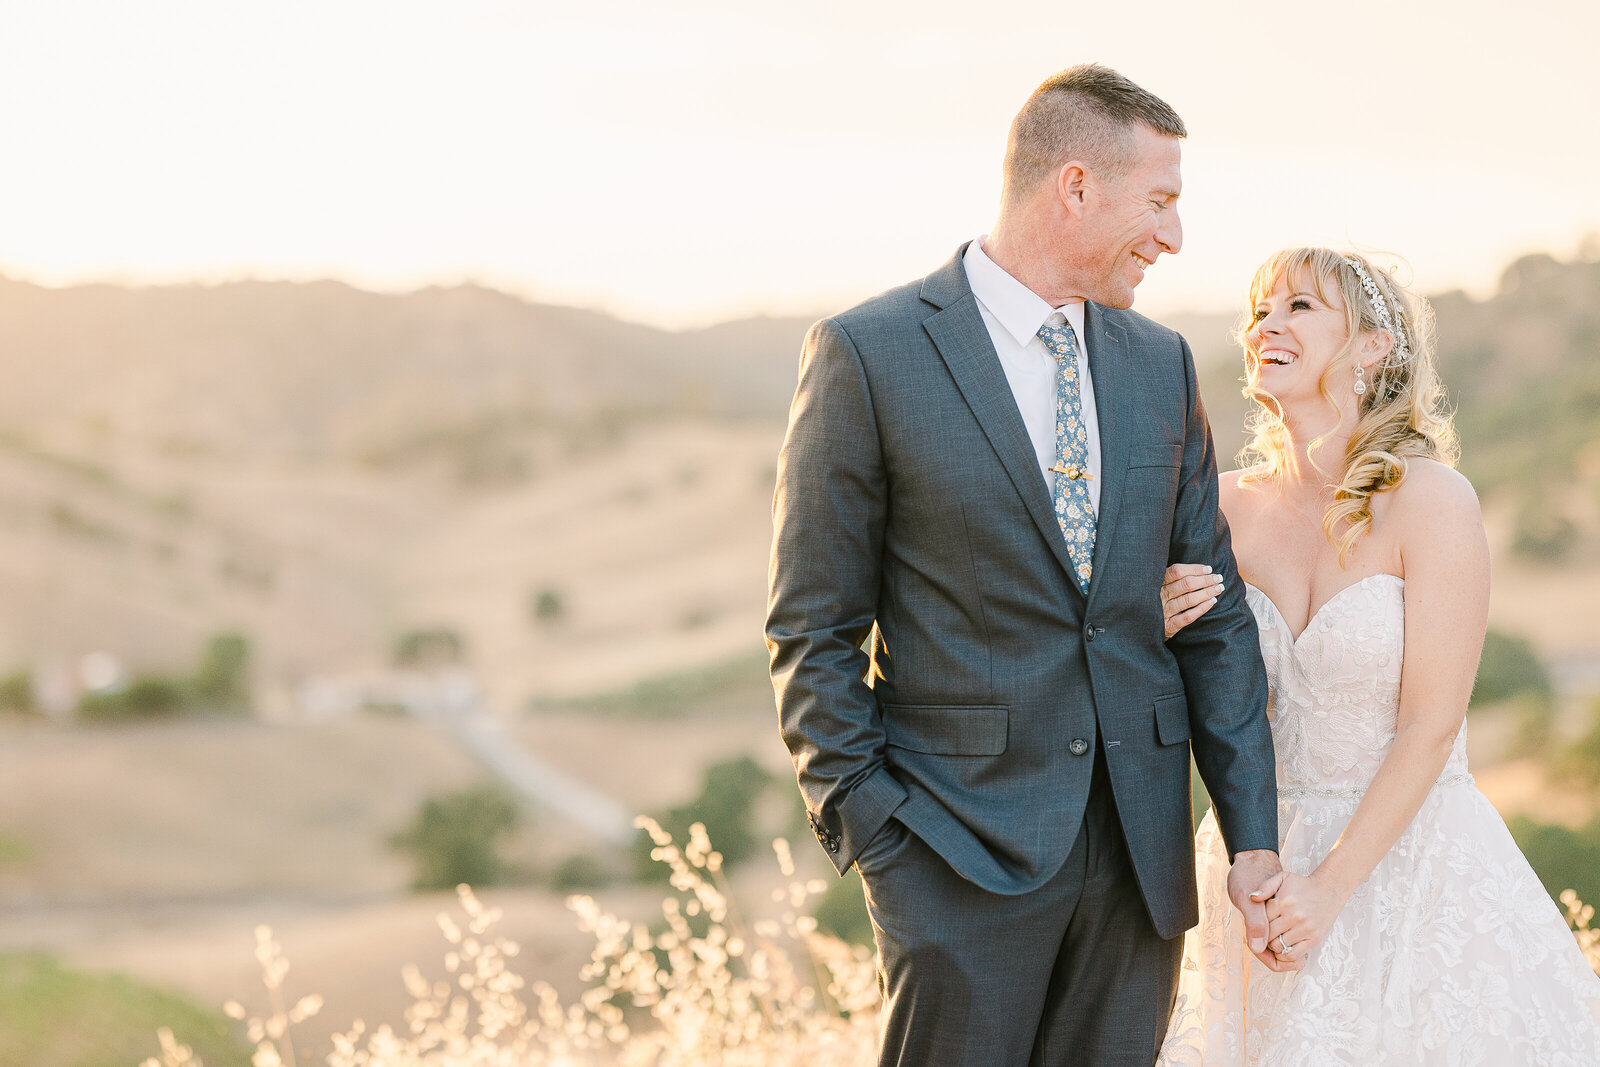 Sunset Wedding Photography in a Vineyard